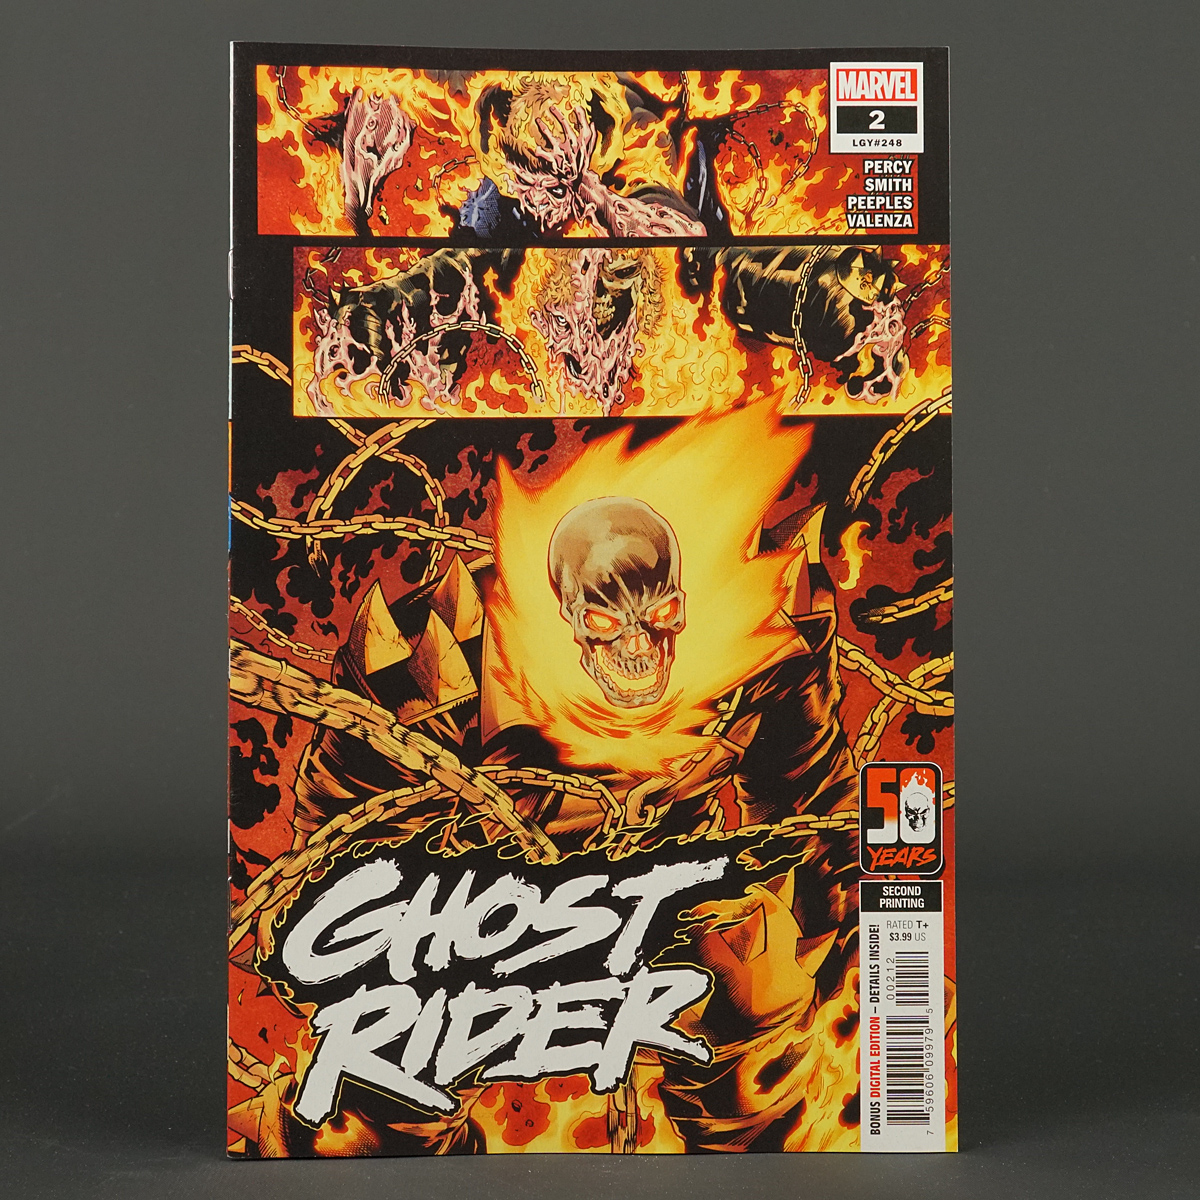 GHOST RIDER #2 2nd ptg Marvel Comics 2022 MAR228730 (W) Percy (A/CA) Smith